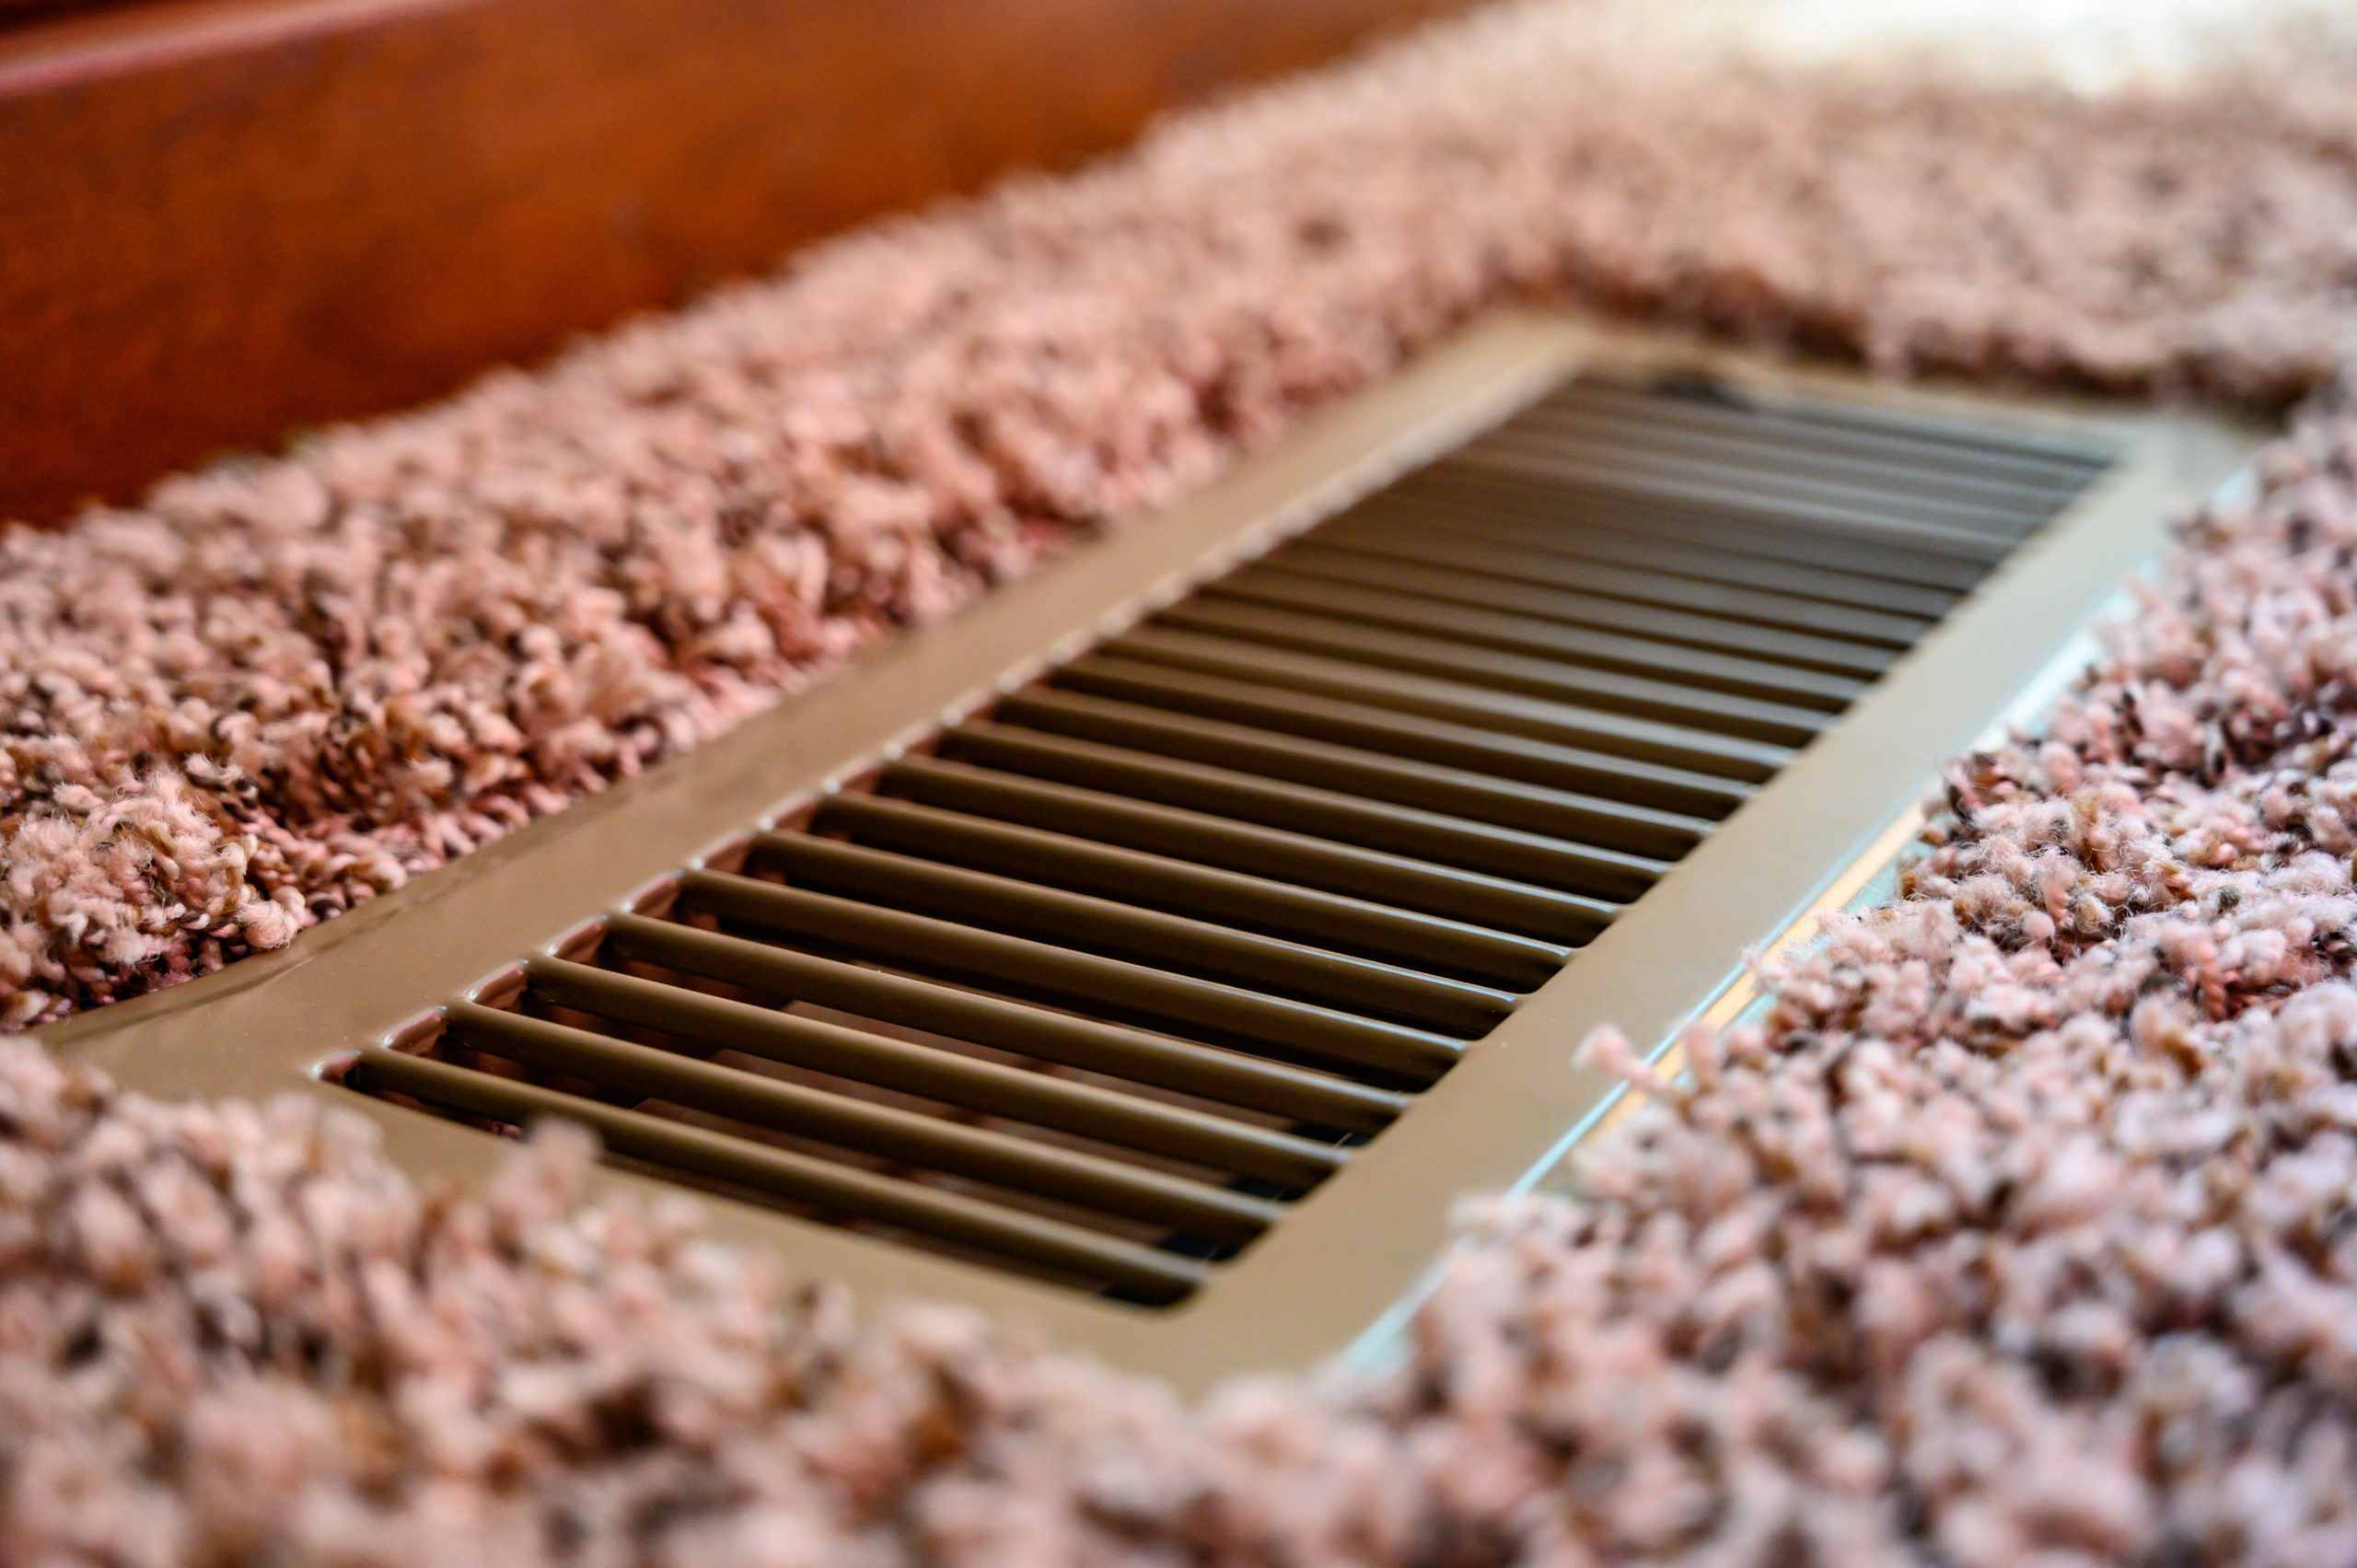 Ducted heater in a floor after a repair by a ducted heating service company